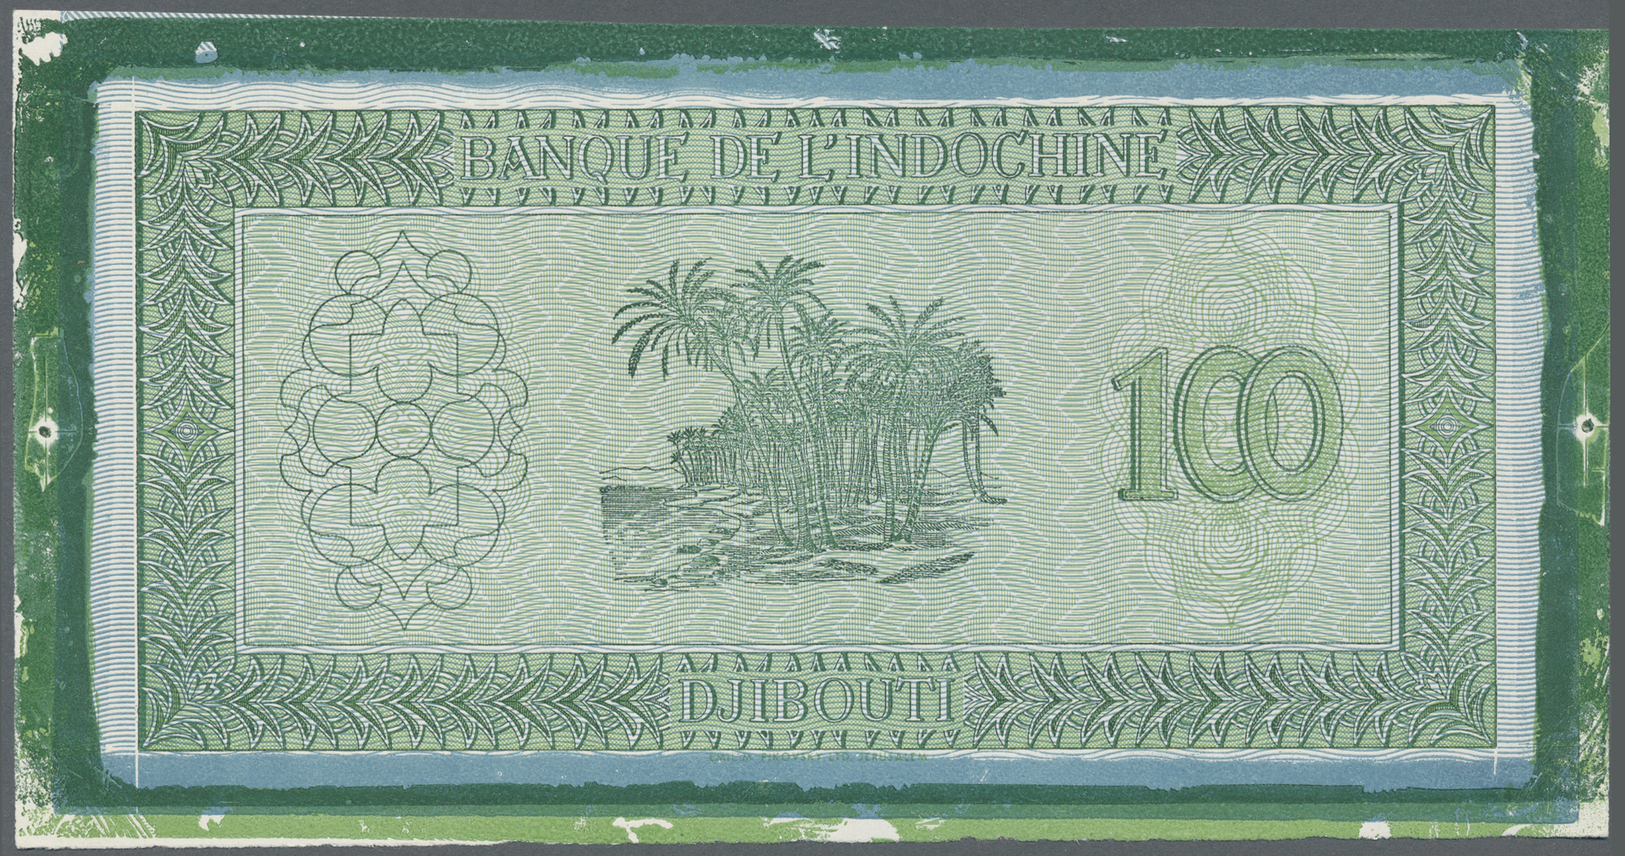 00650 Djibouti / Dschibuti: 100 Francs ND(1945) PROOF Of P. 16p, A Highly Rare And Rarely Offered Pair Of Proof Prints ( - Djibouti